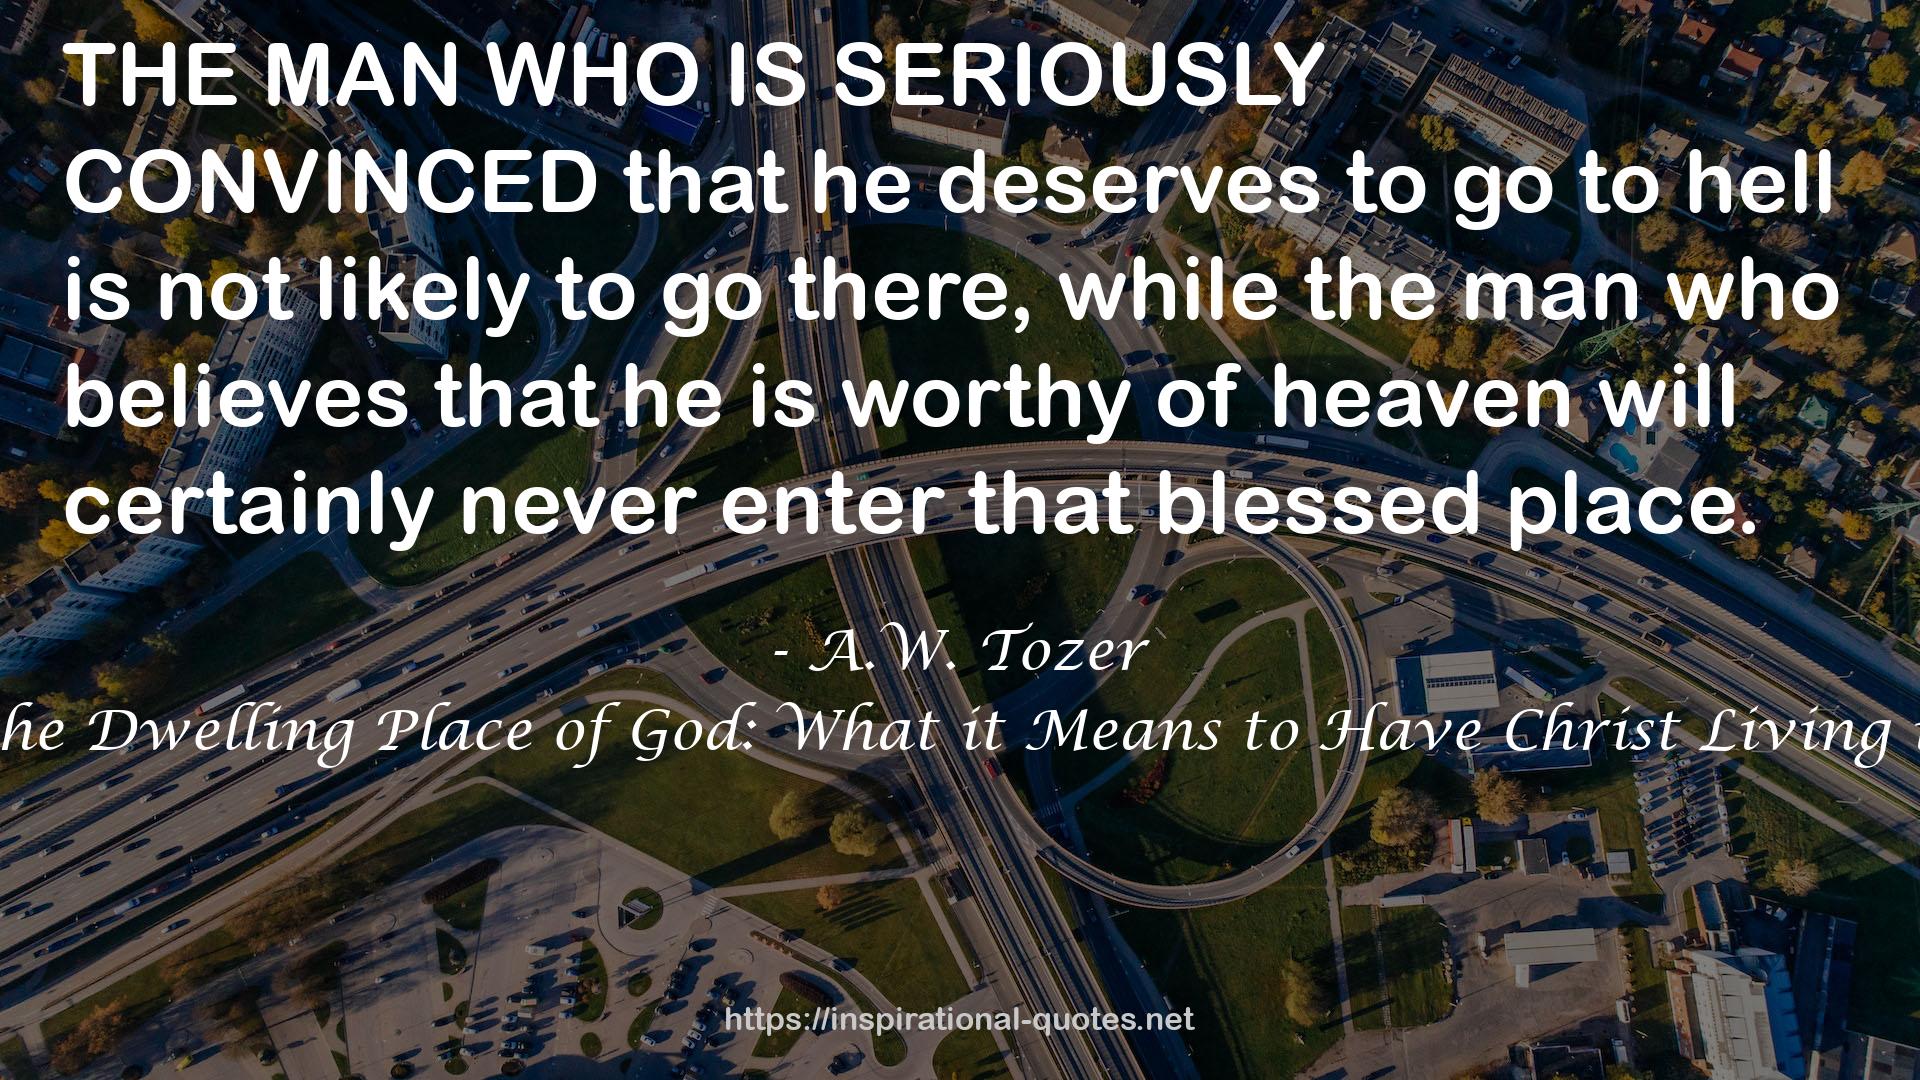 Man the Dwelling Place of God: What it Means to Have Christ Living in You QUOTES